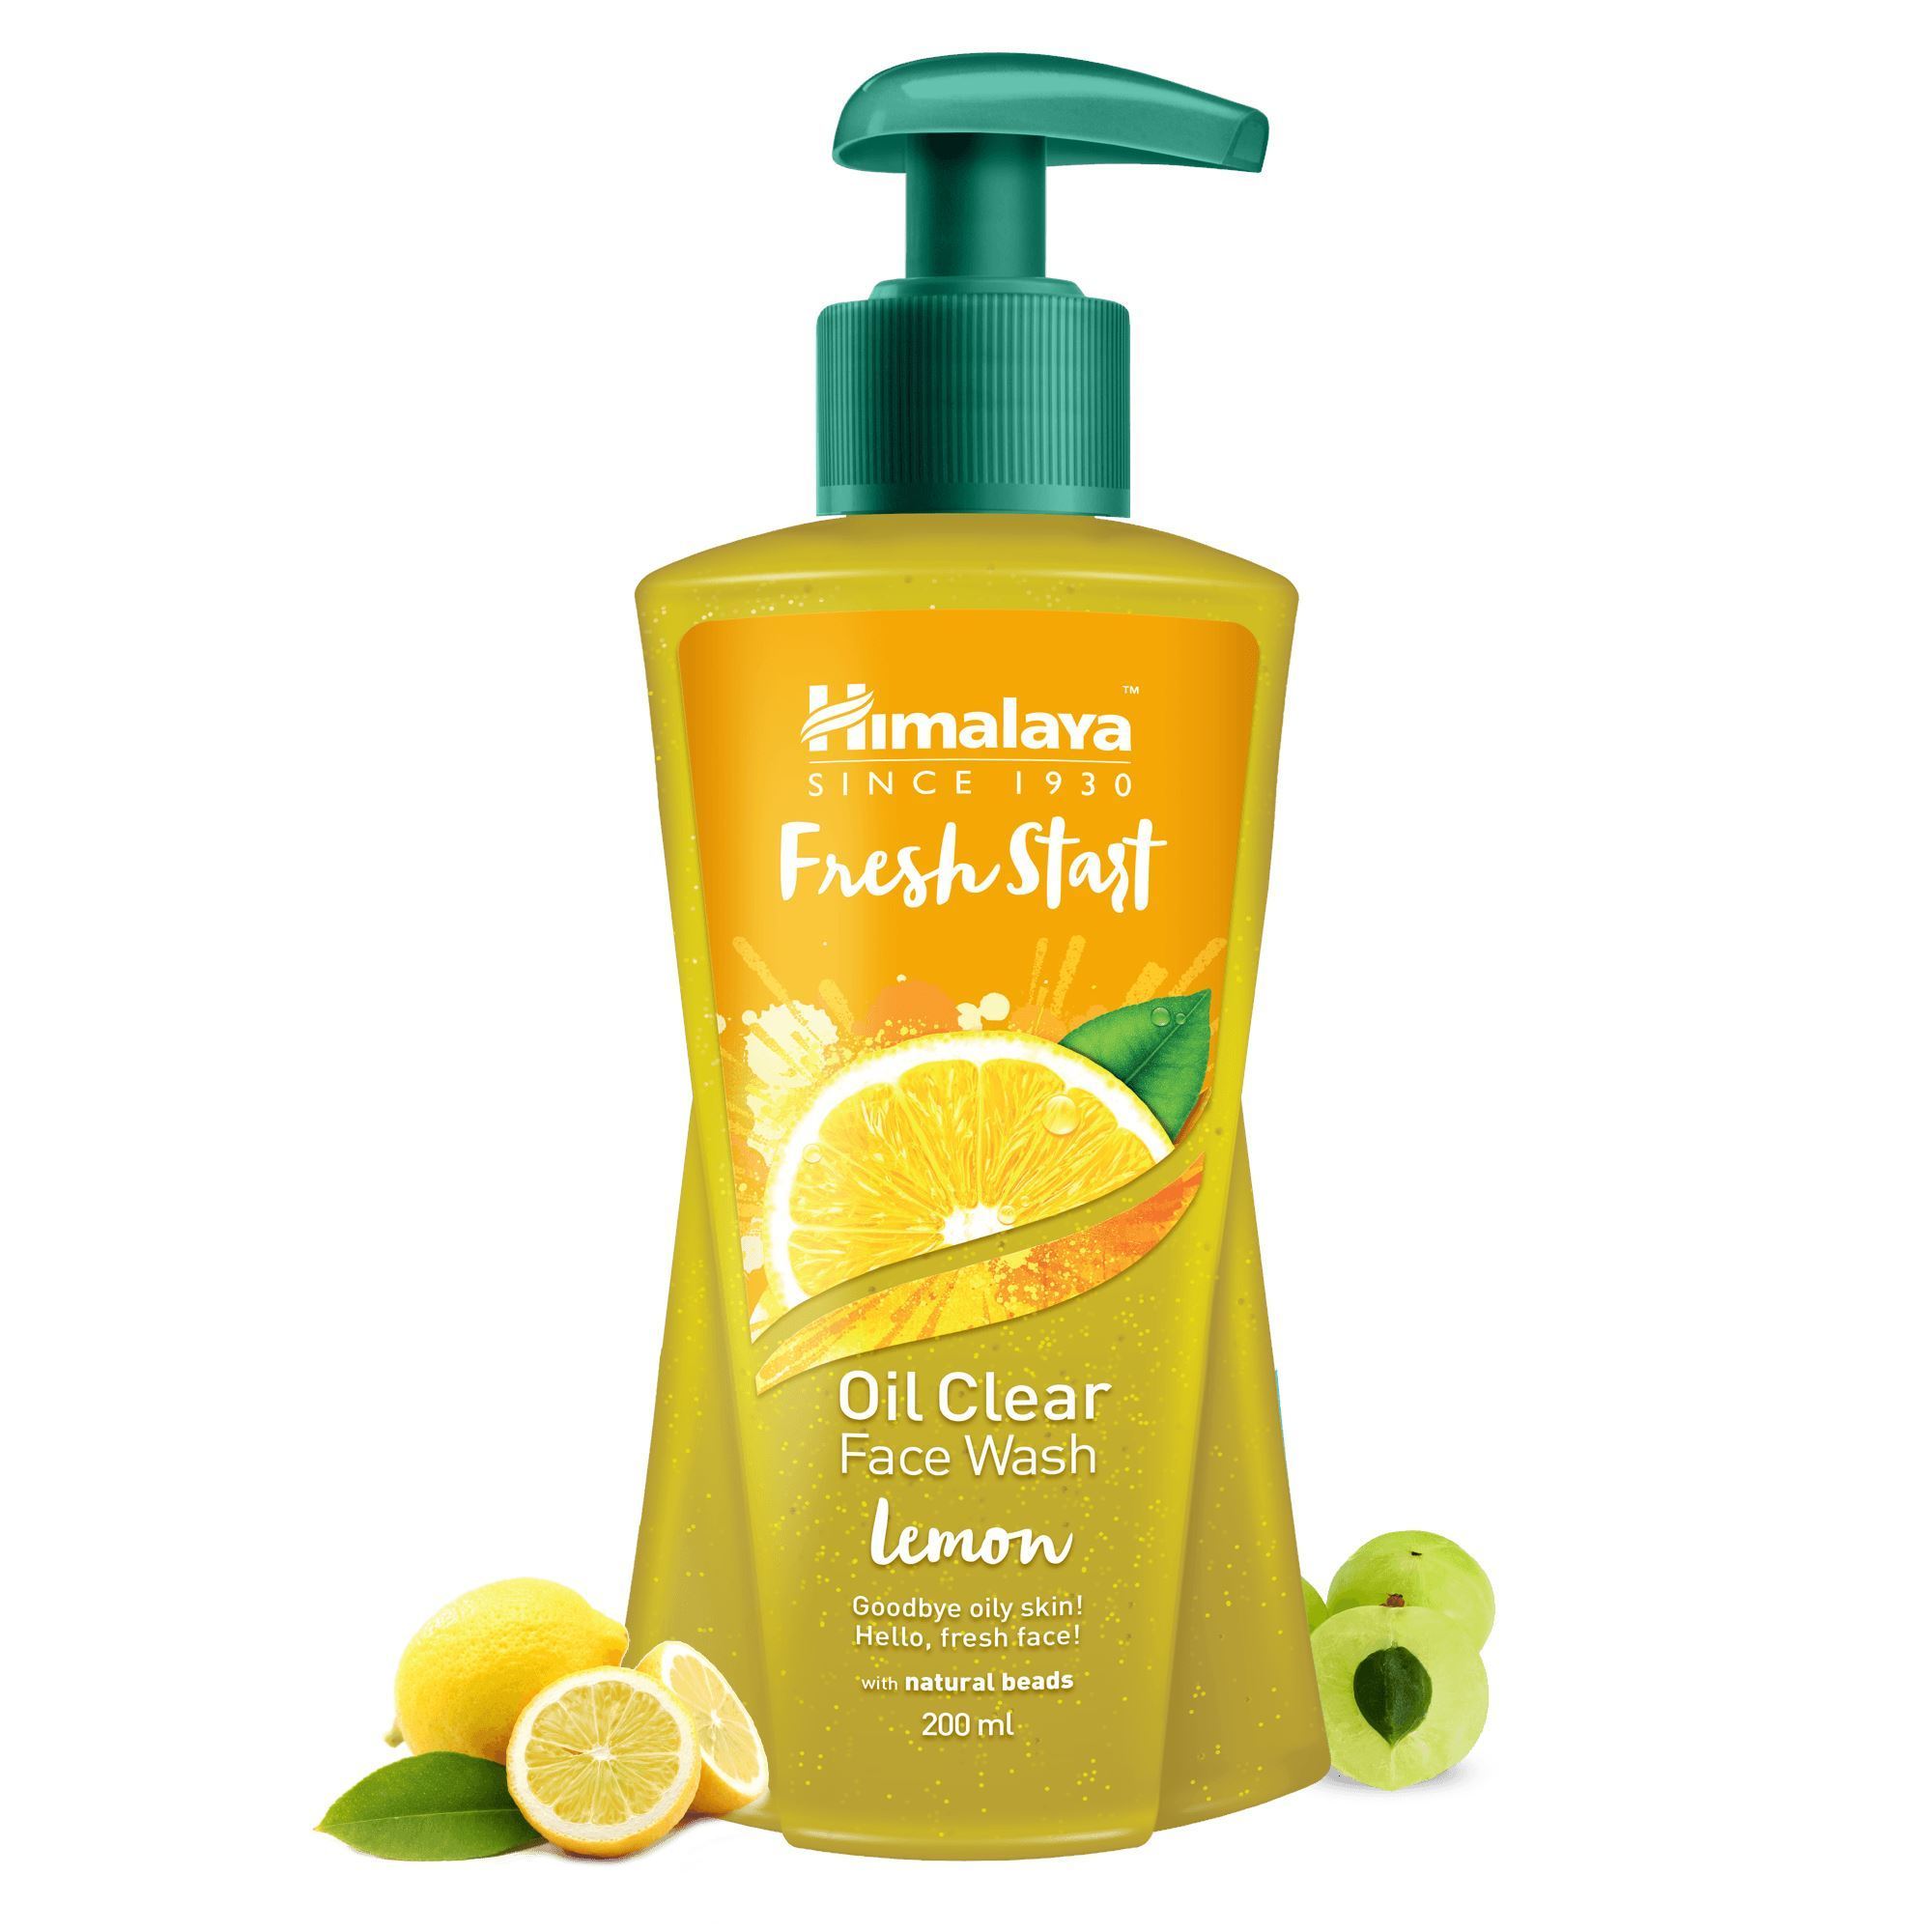 Himalaya Fresh Start Oil Clear Lemon Face Wash 200ml - Helps remove excess oil, dirt, and impurities